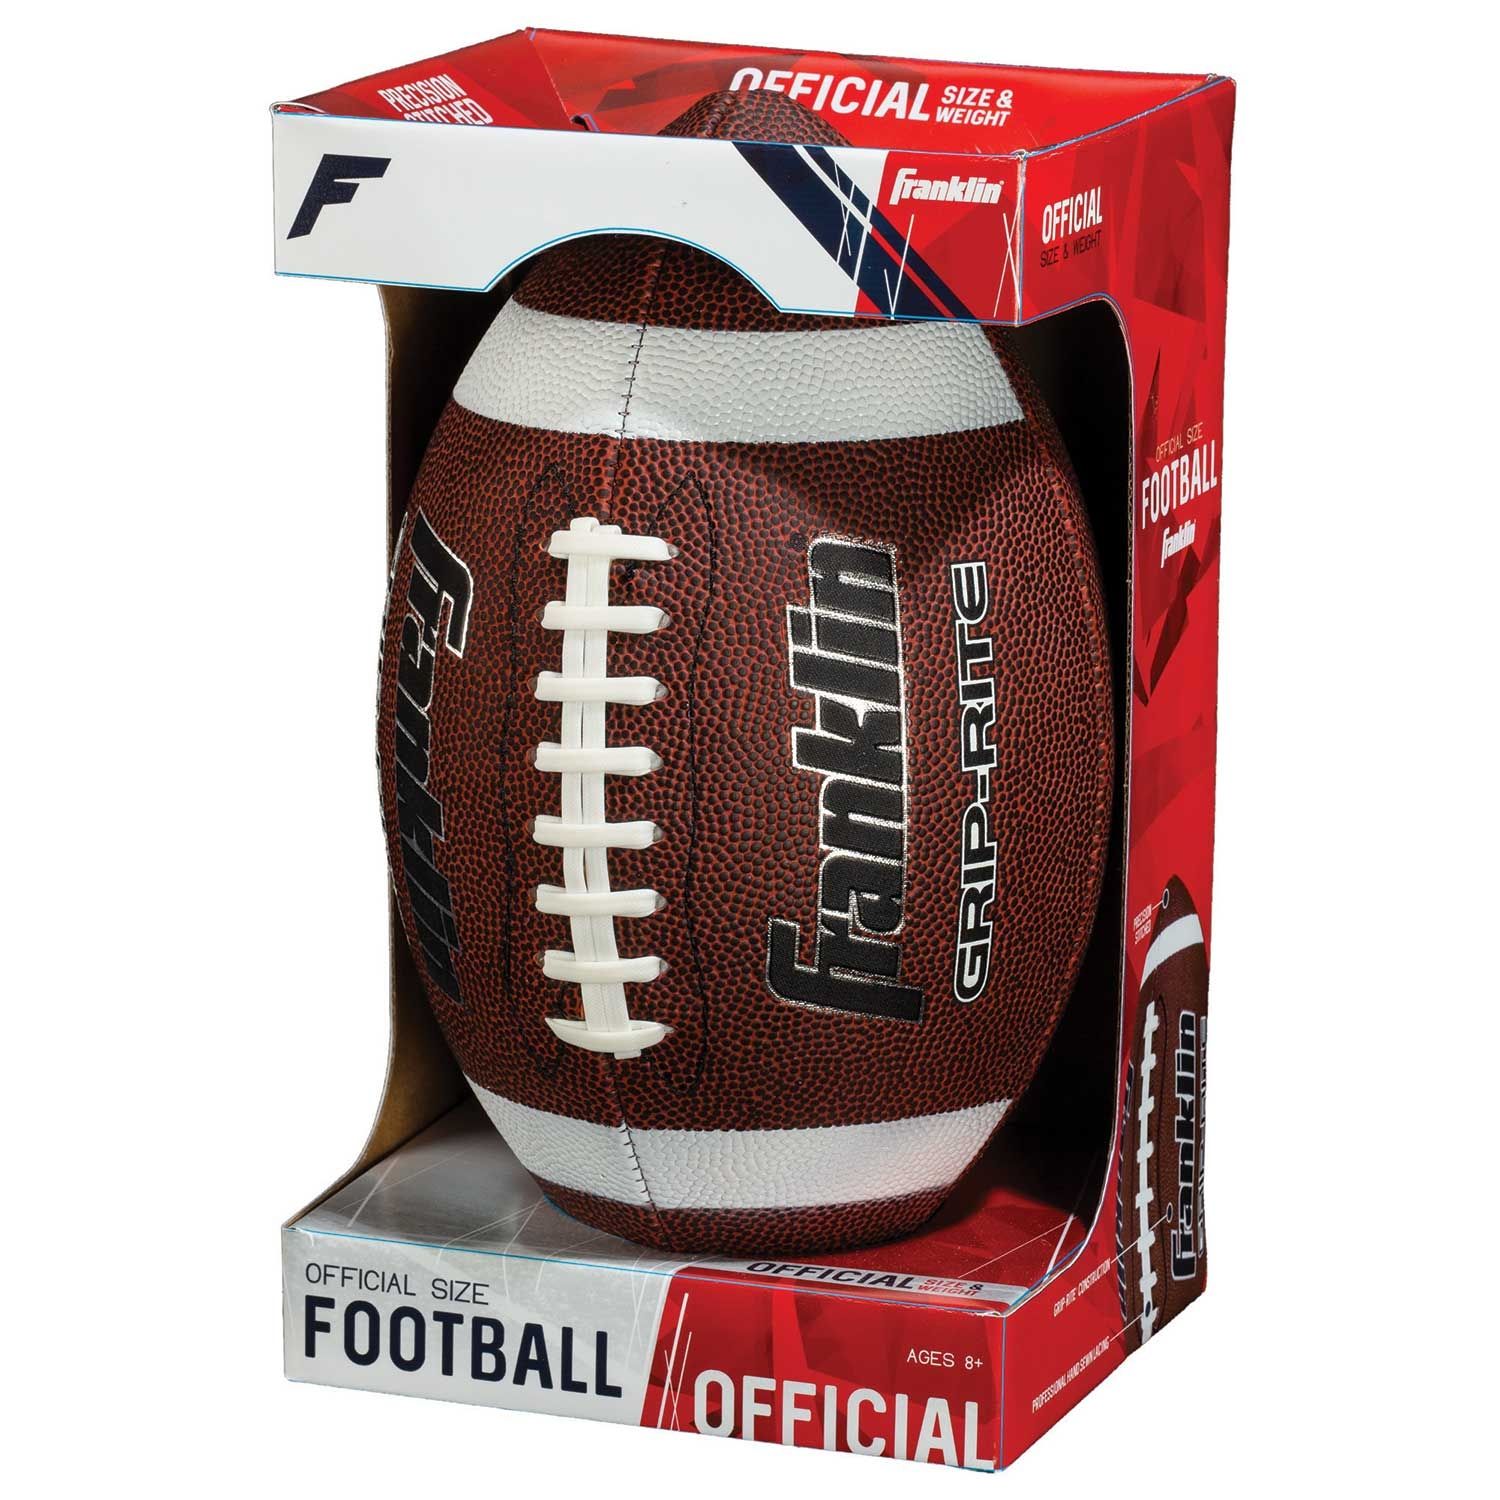 Franklin Grip-Rite Official Size Football